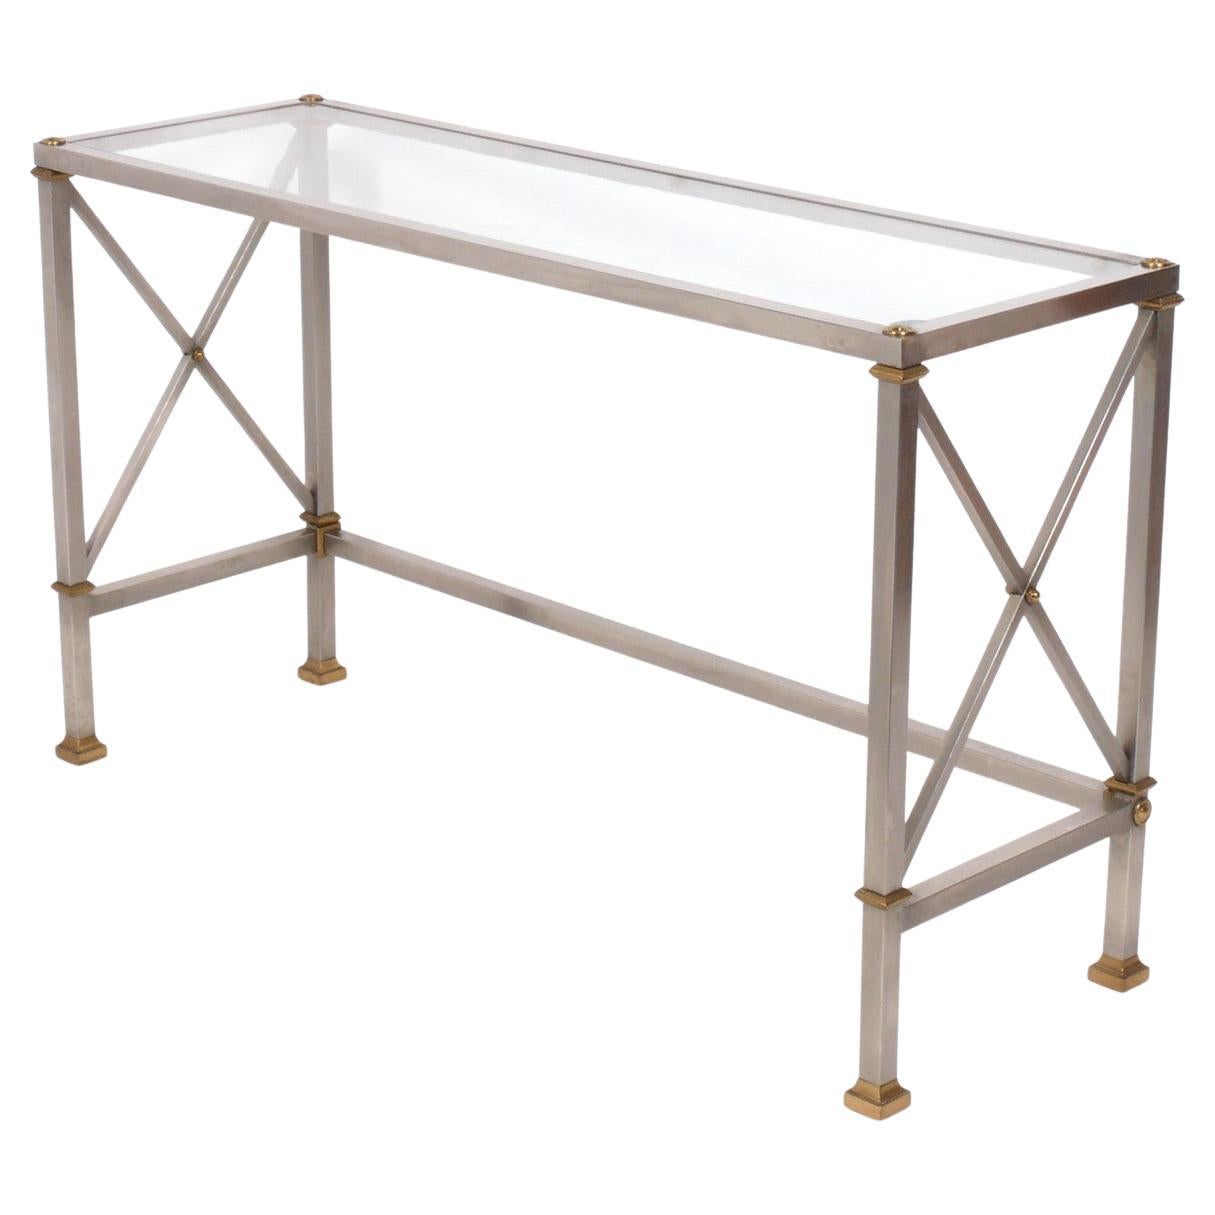 Elegant Stainless Steel and Brass Console Table or Desk